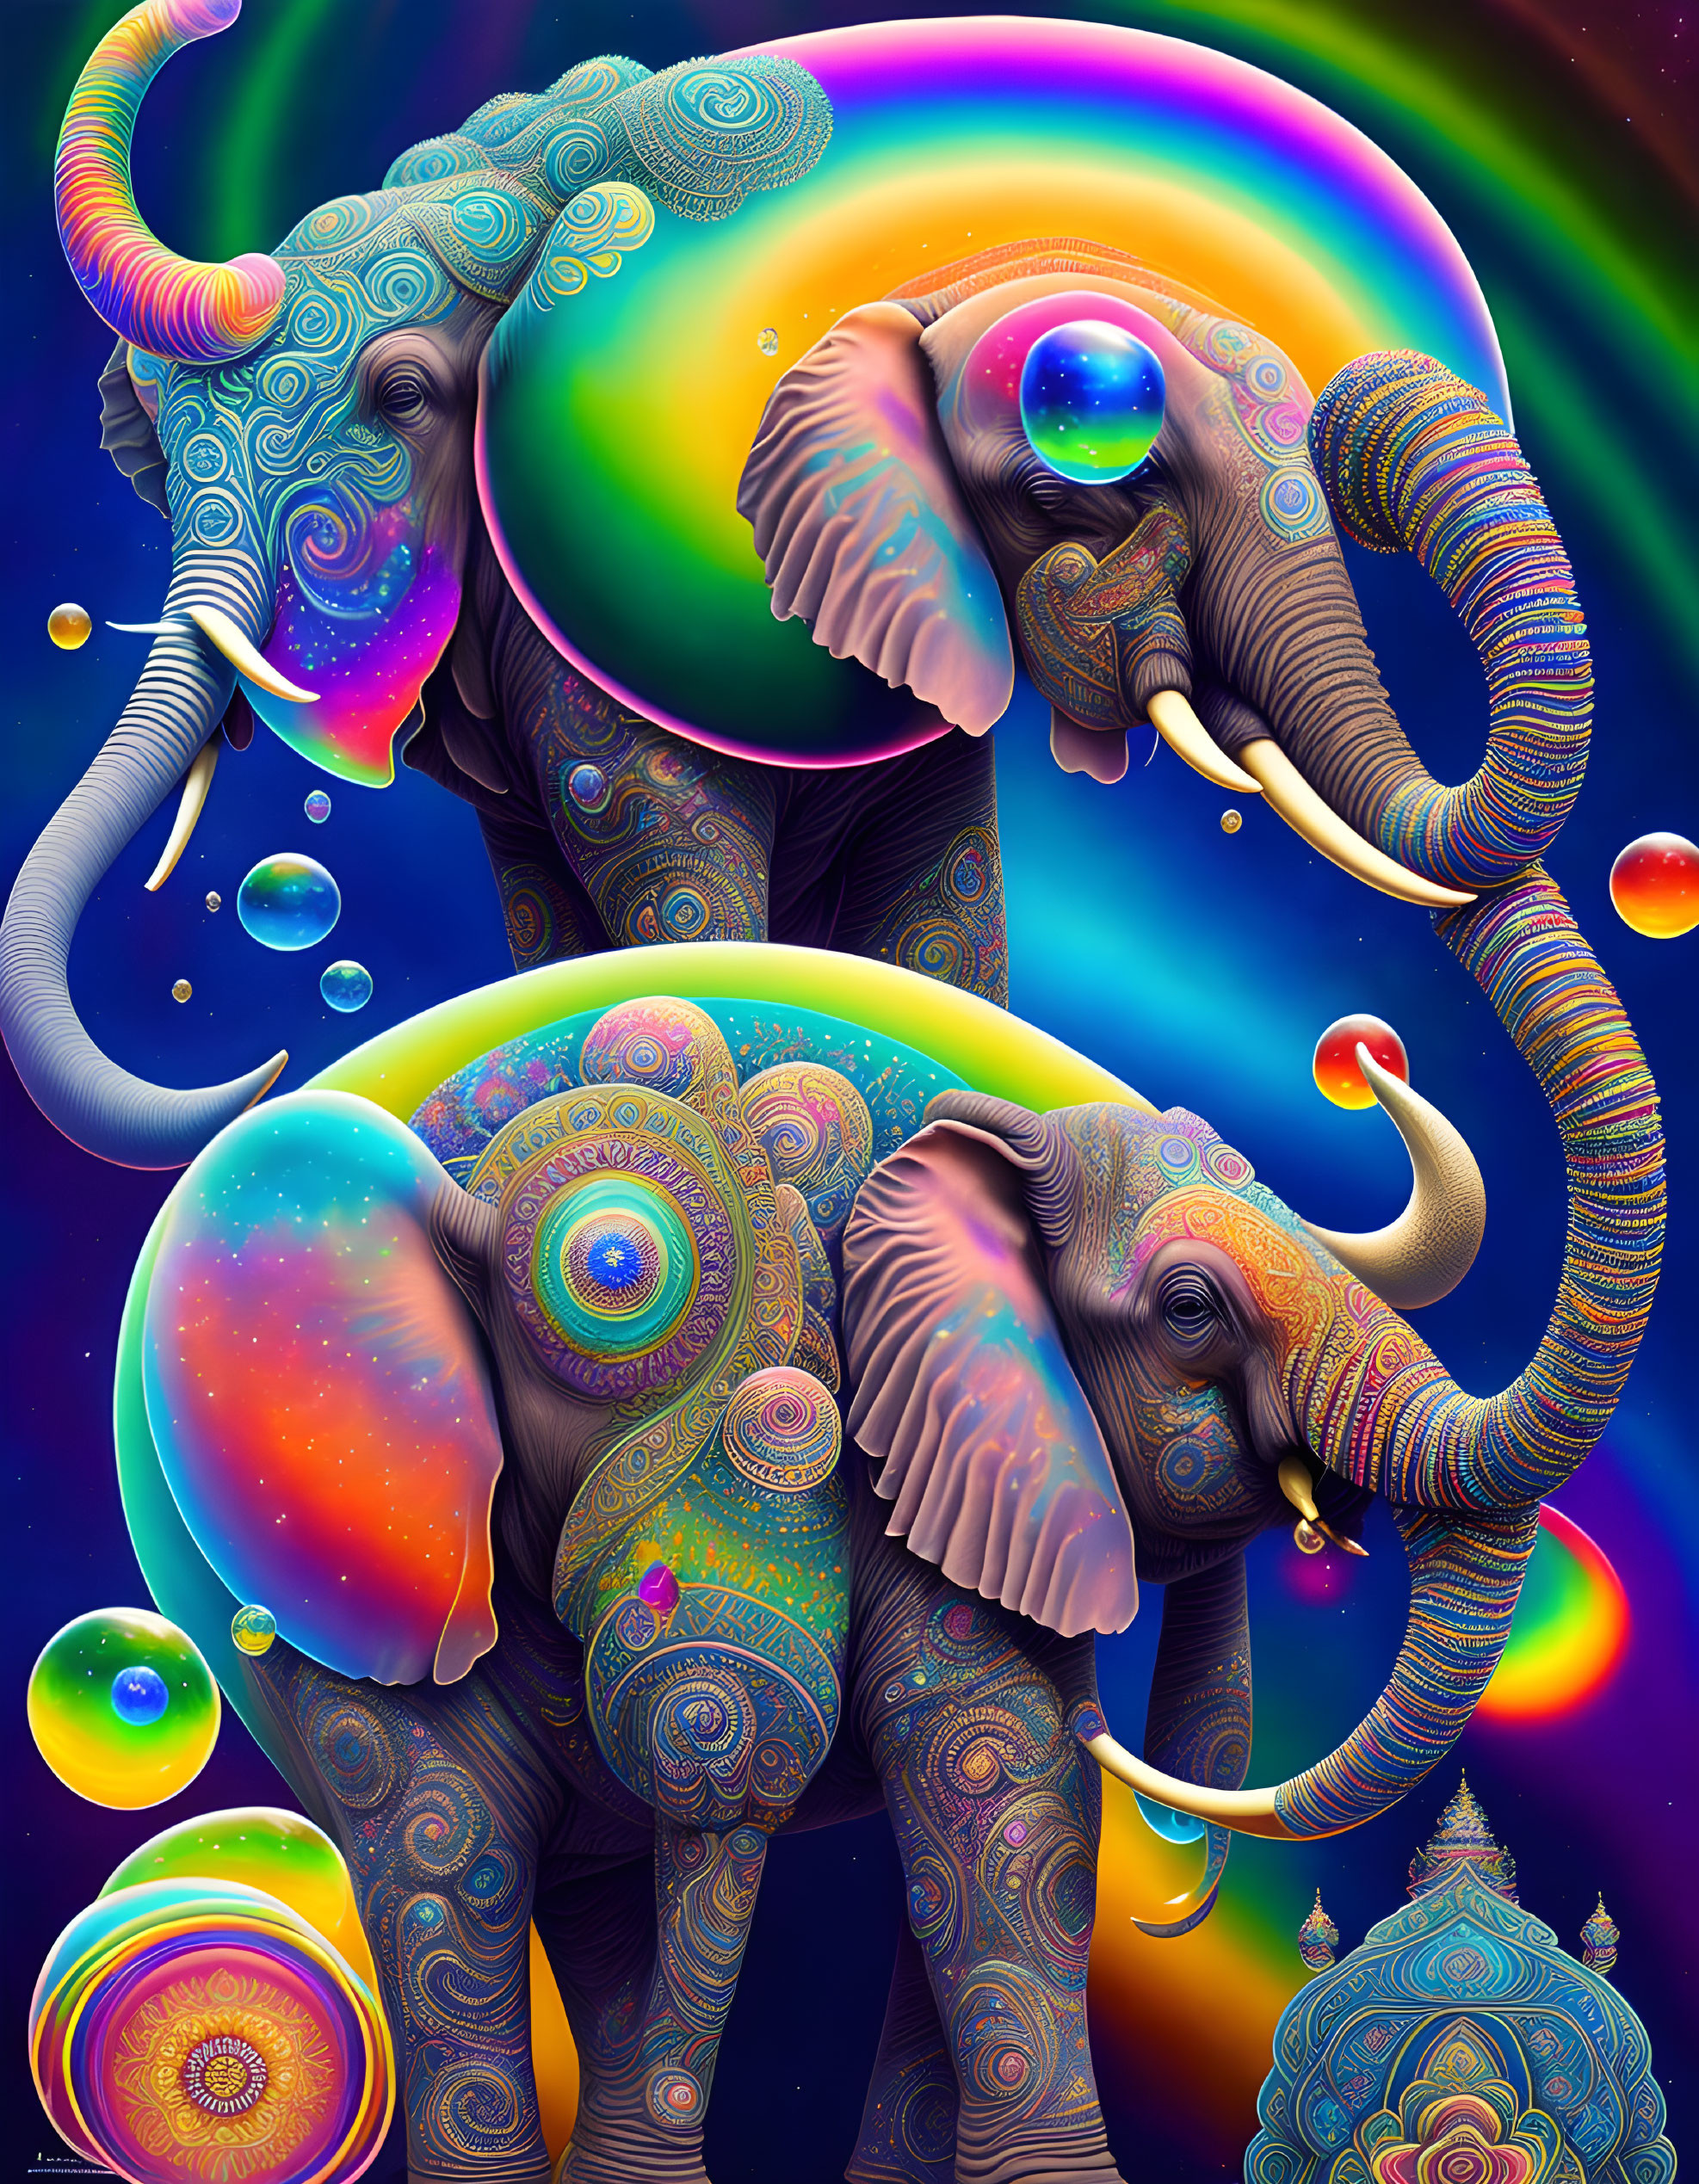 Elephants from another planet 